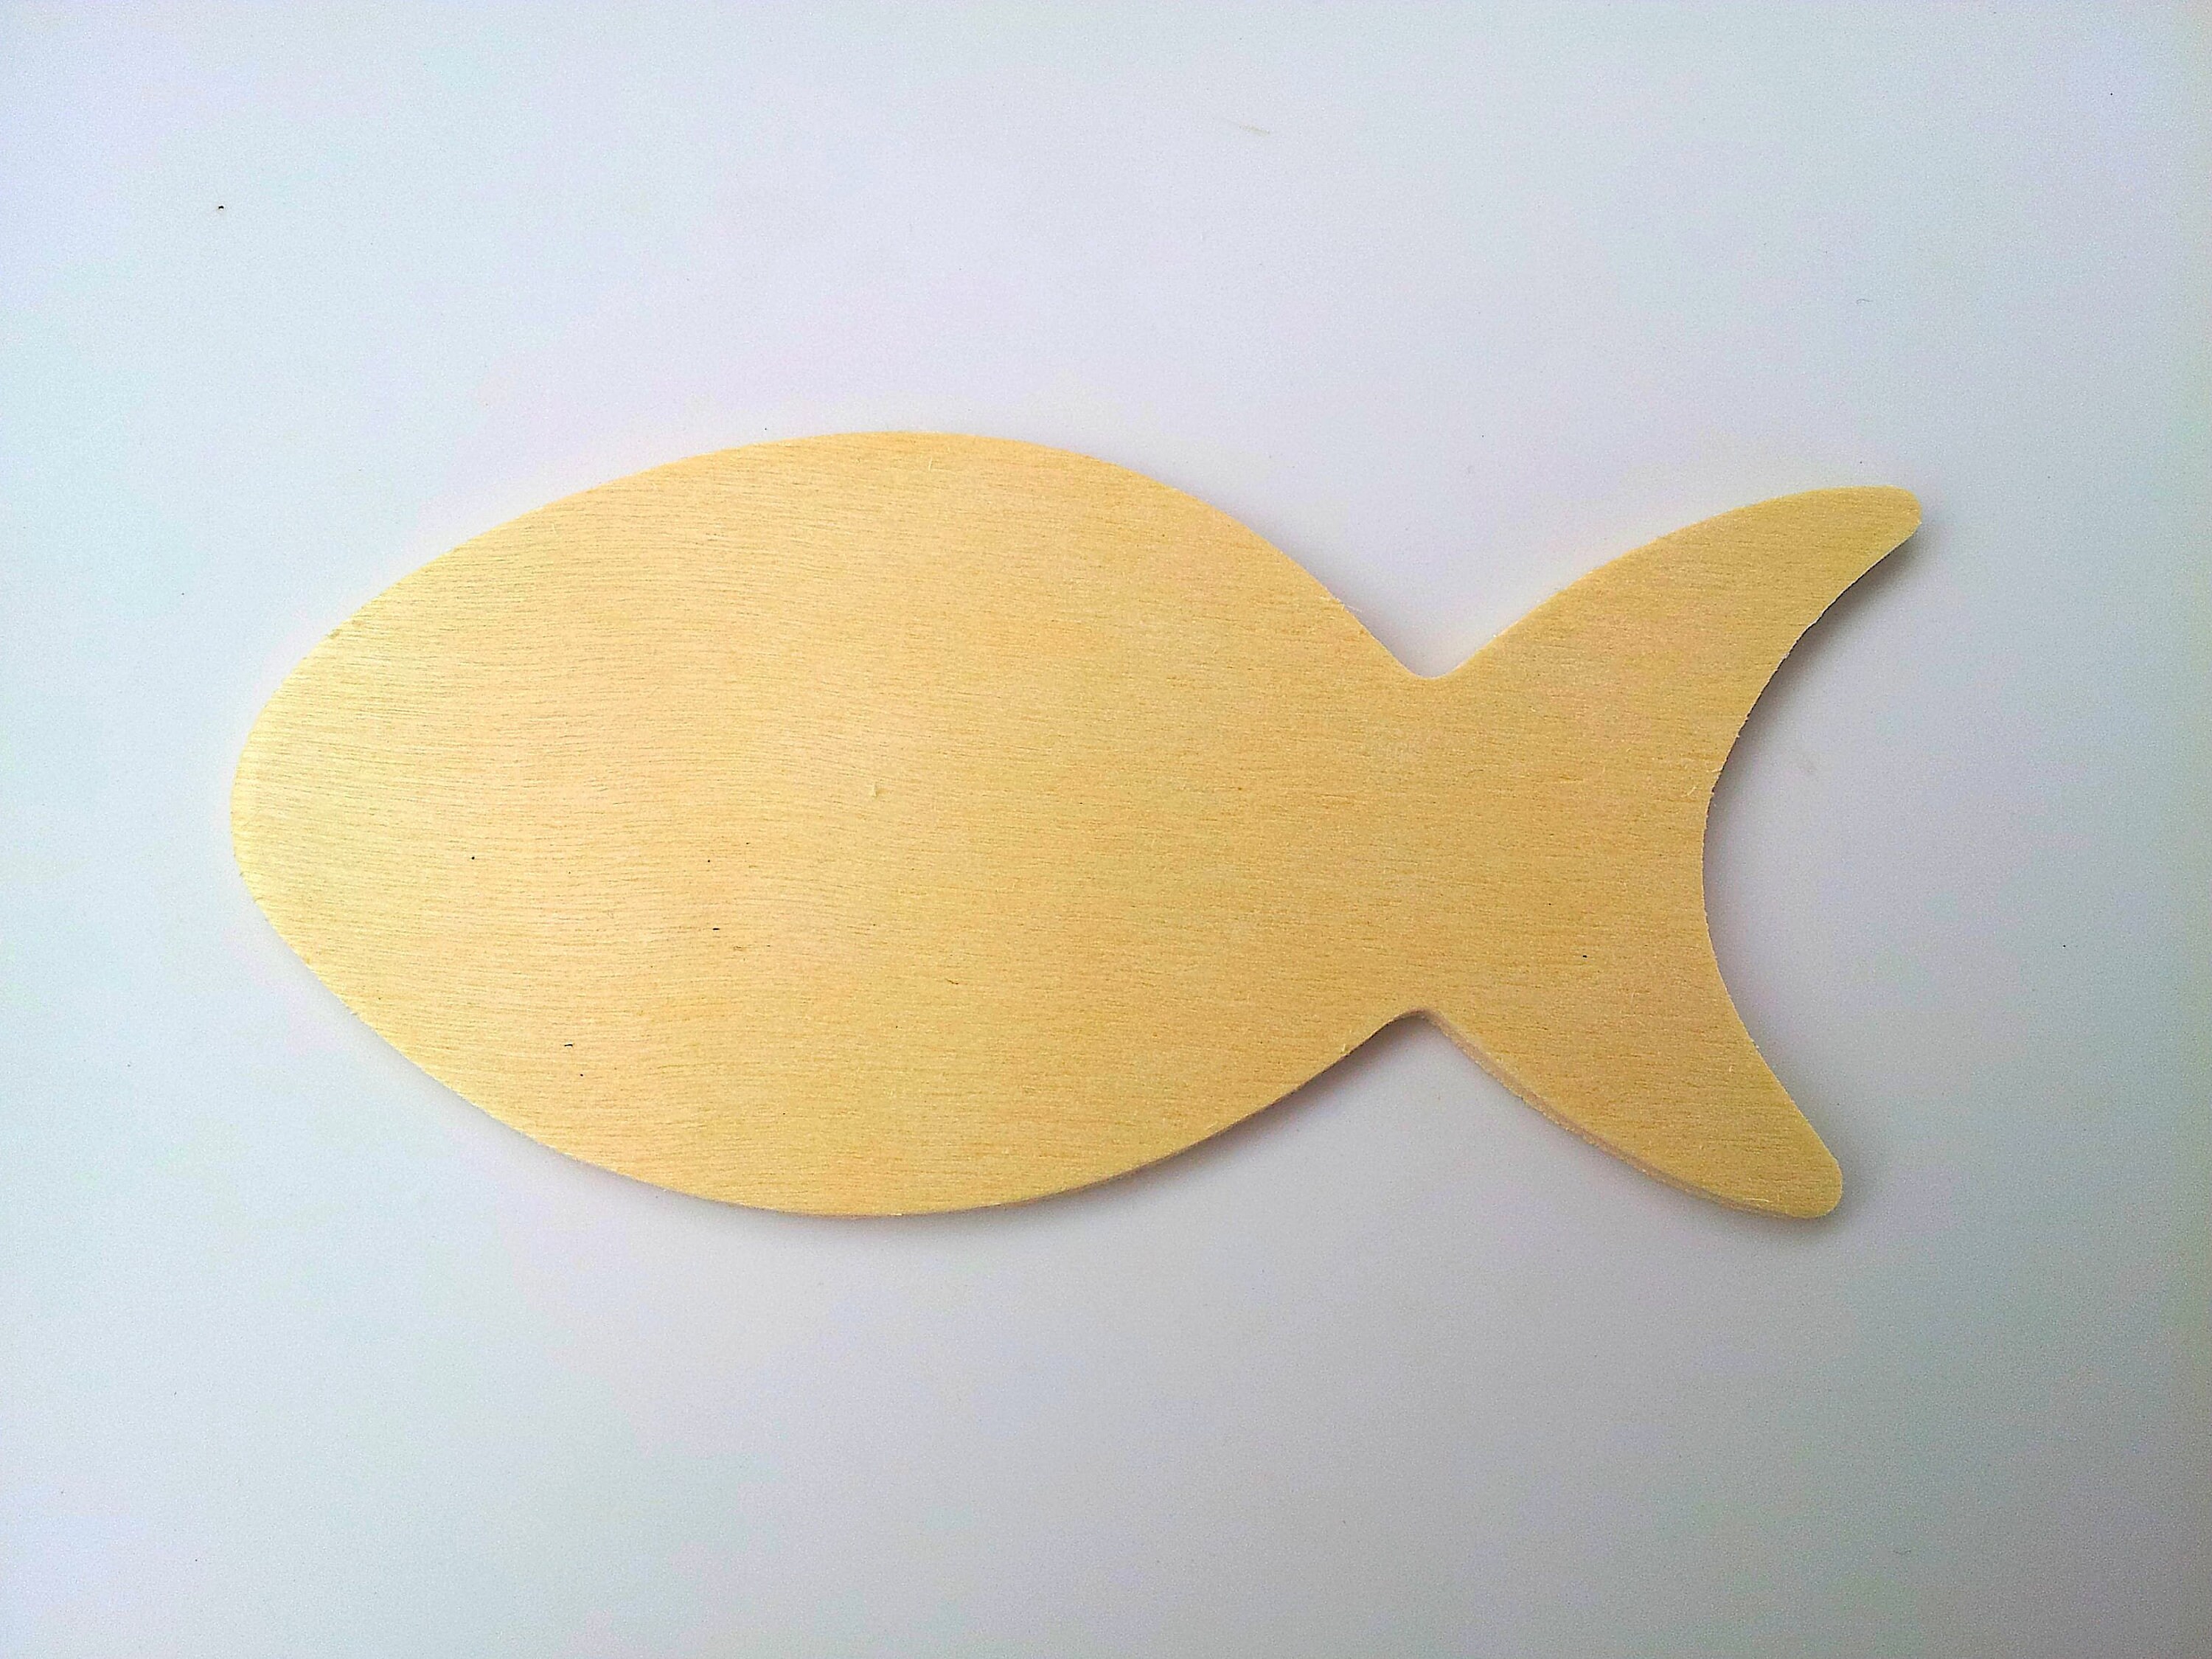 LEOGOR Multilayered Wood Crafts for Kids - Painting Activity with Unfinished Fish Cutouts - DIY Wooden Things to Paint for Girls Ages 8-12 and Boys